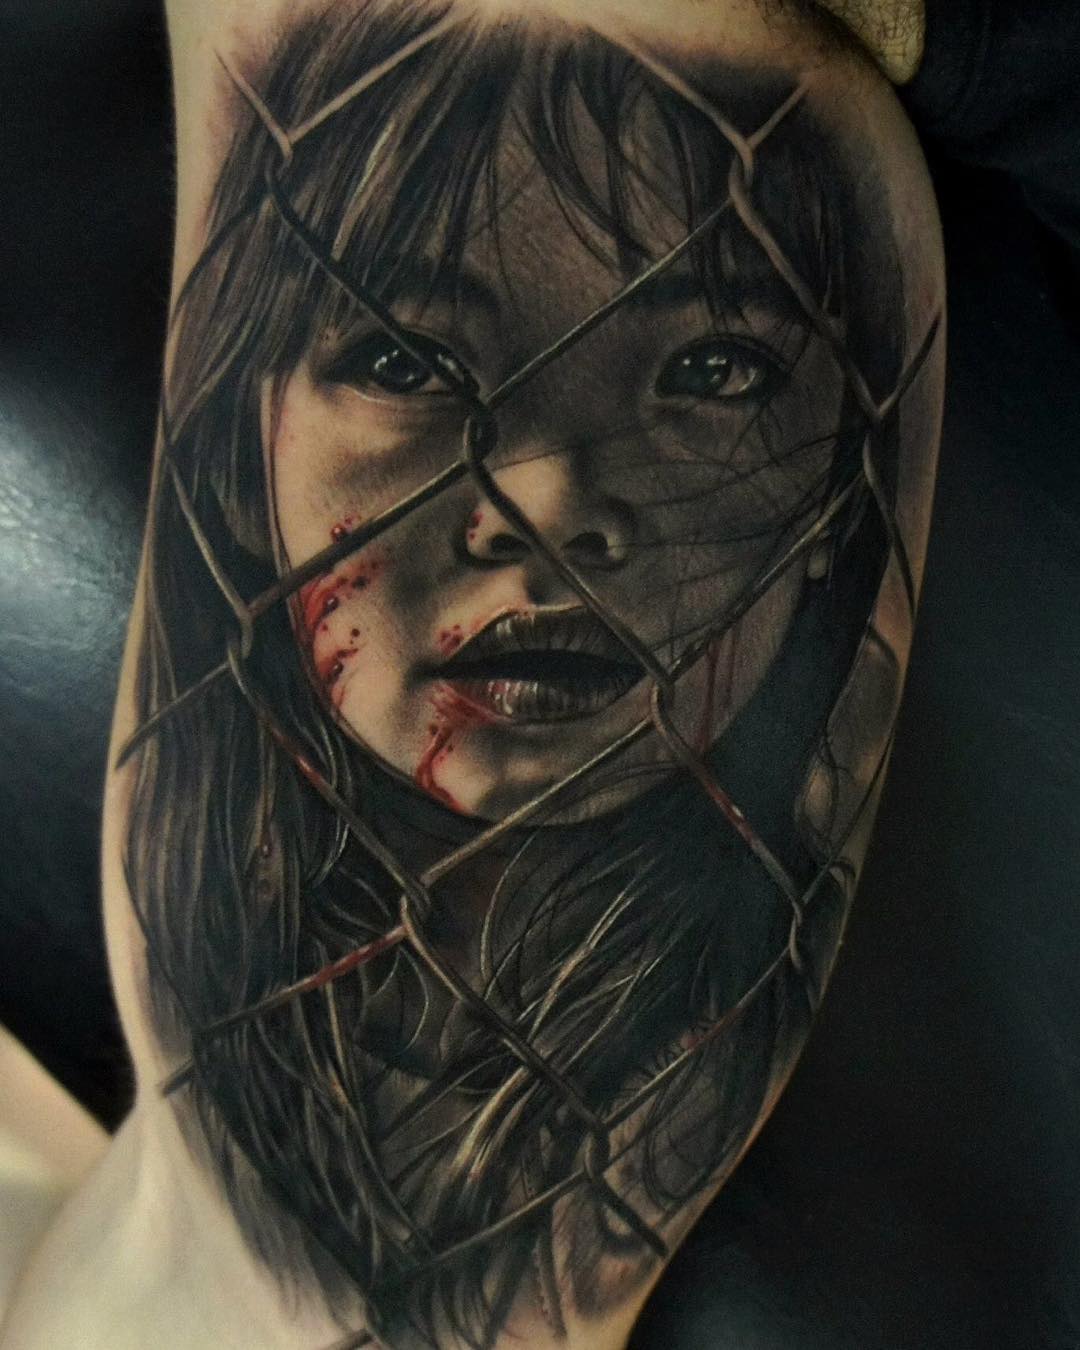 the black and grey portrait of a girl behind the fence - realistic tattoo